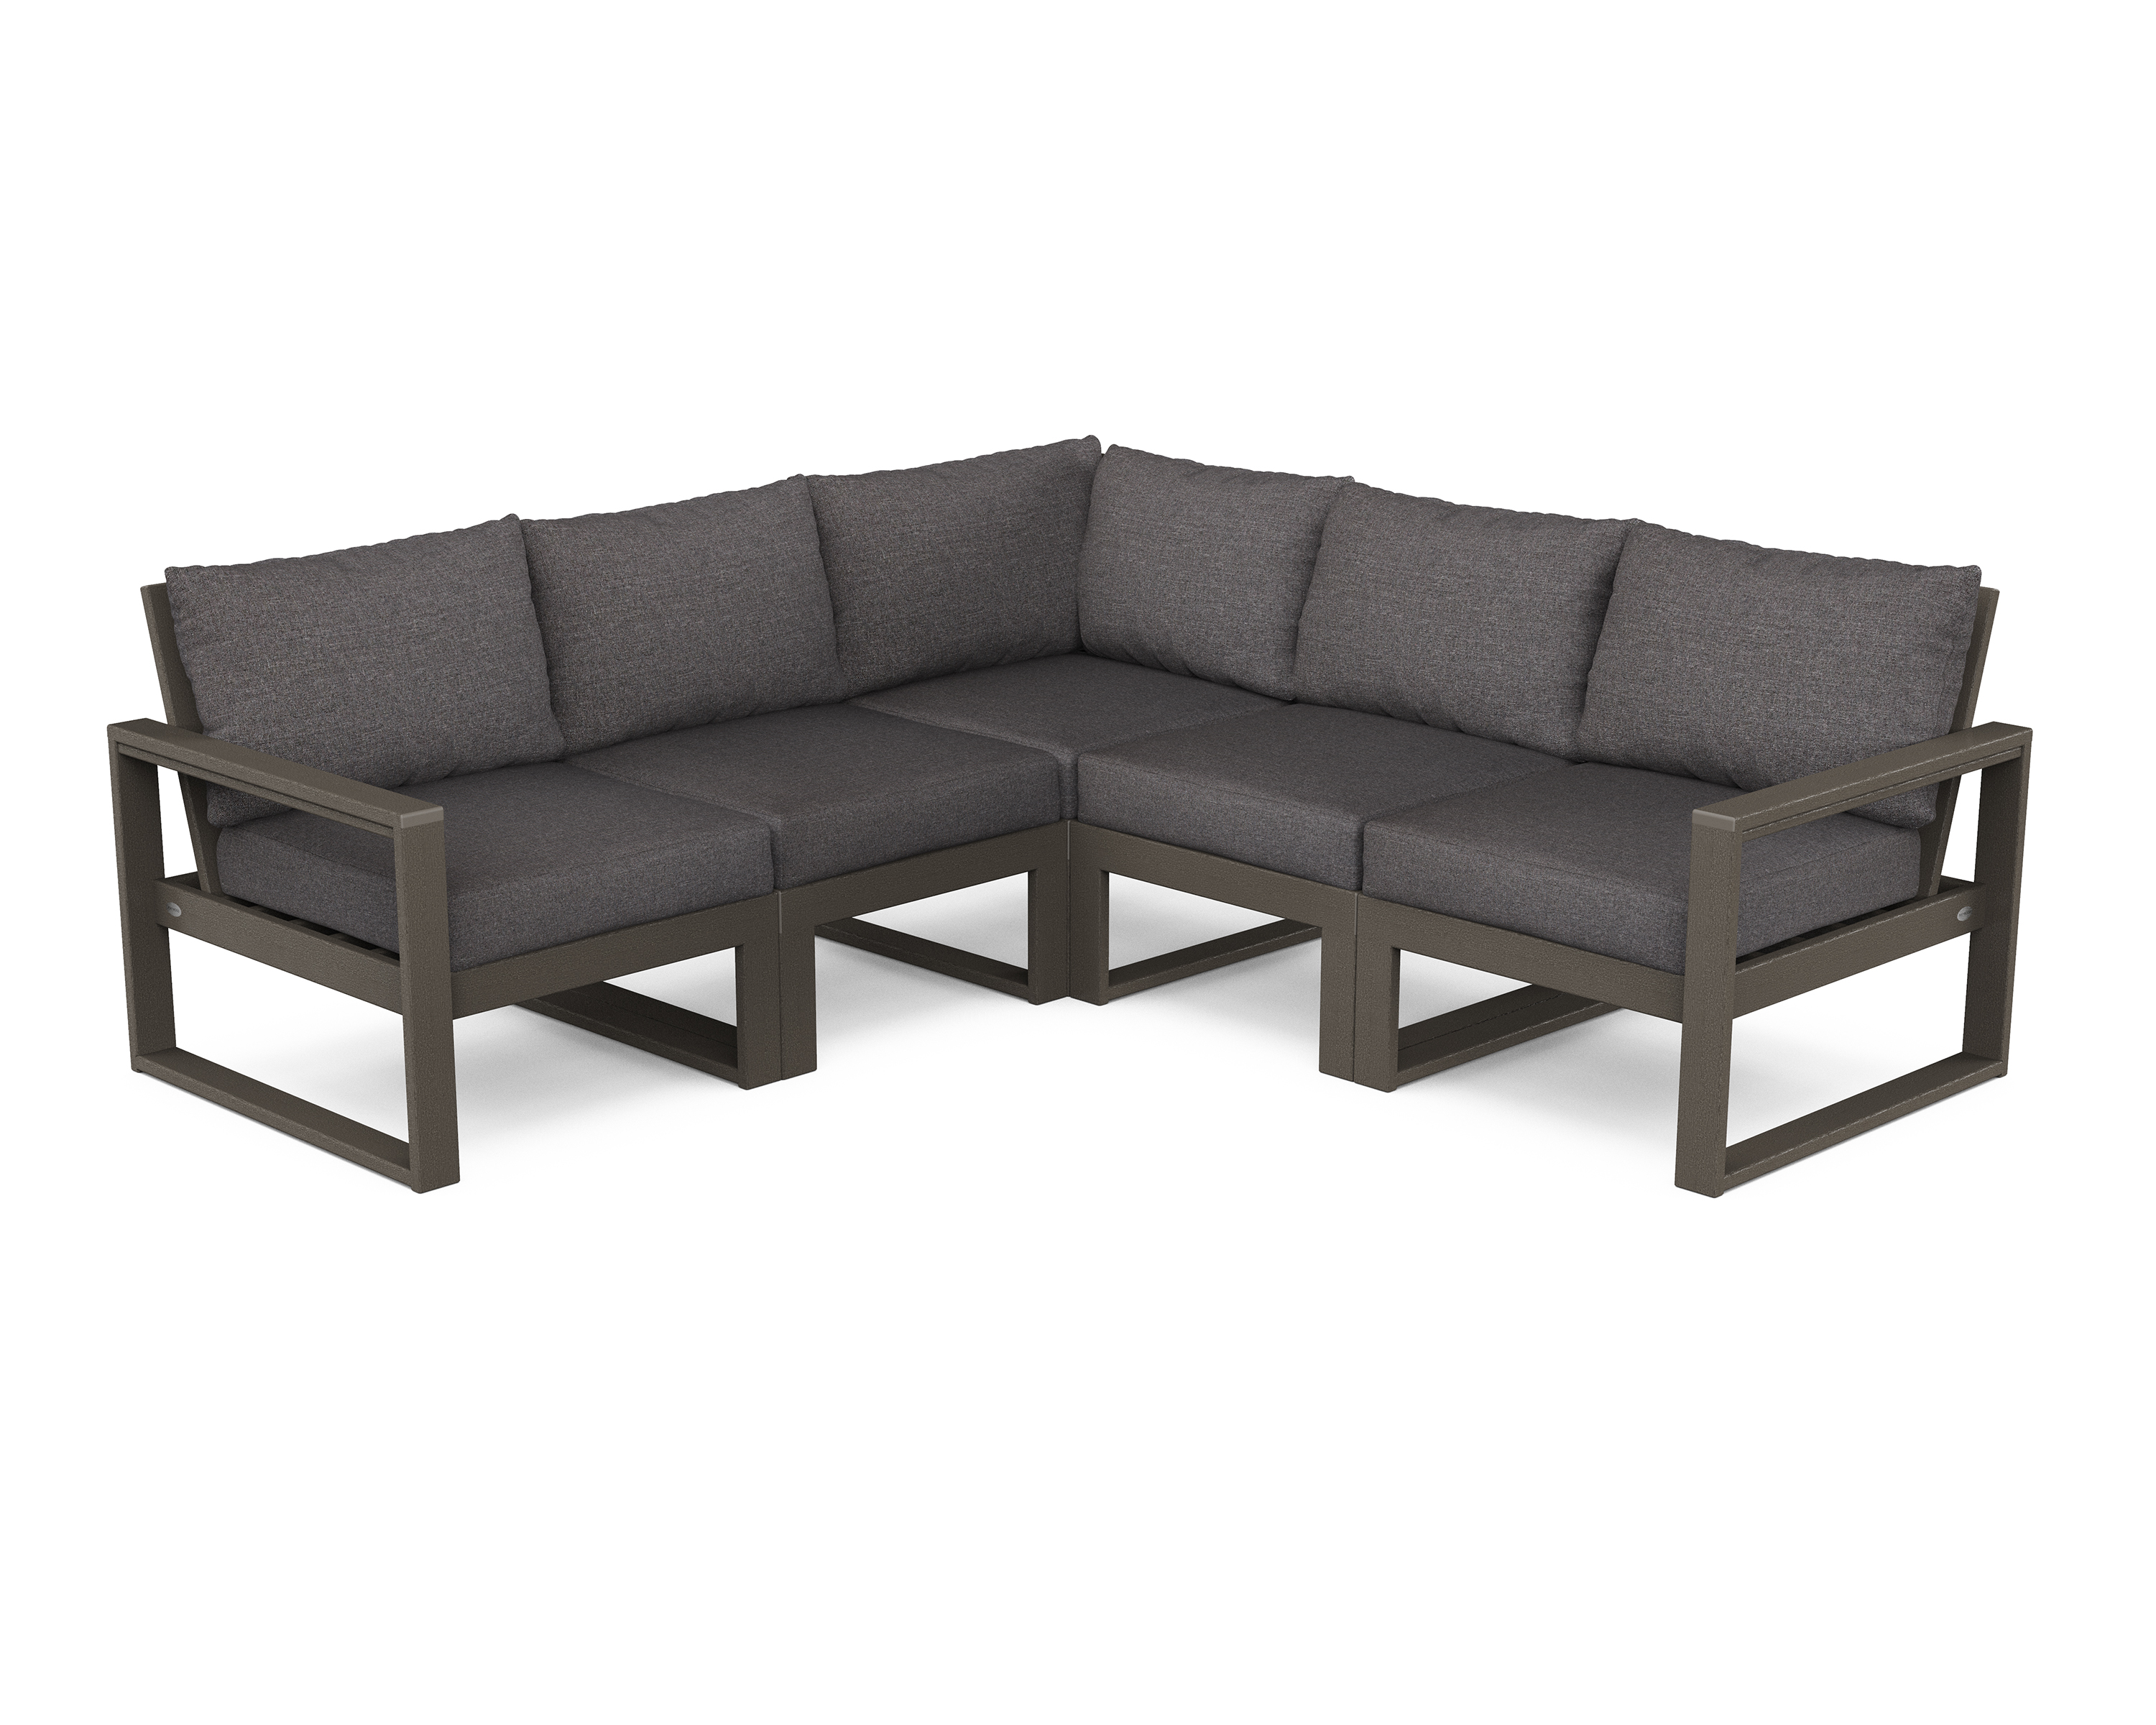 edge 5-piece modular deep seating set in vintage coffee / ash charcoal product image